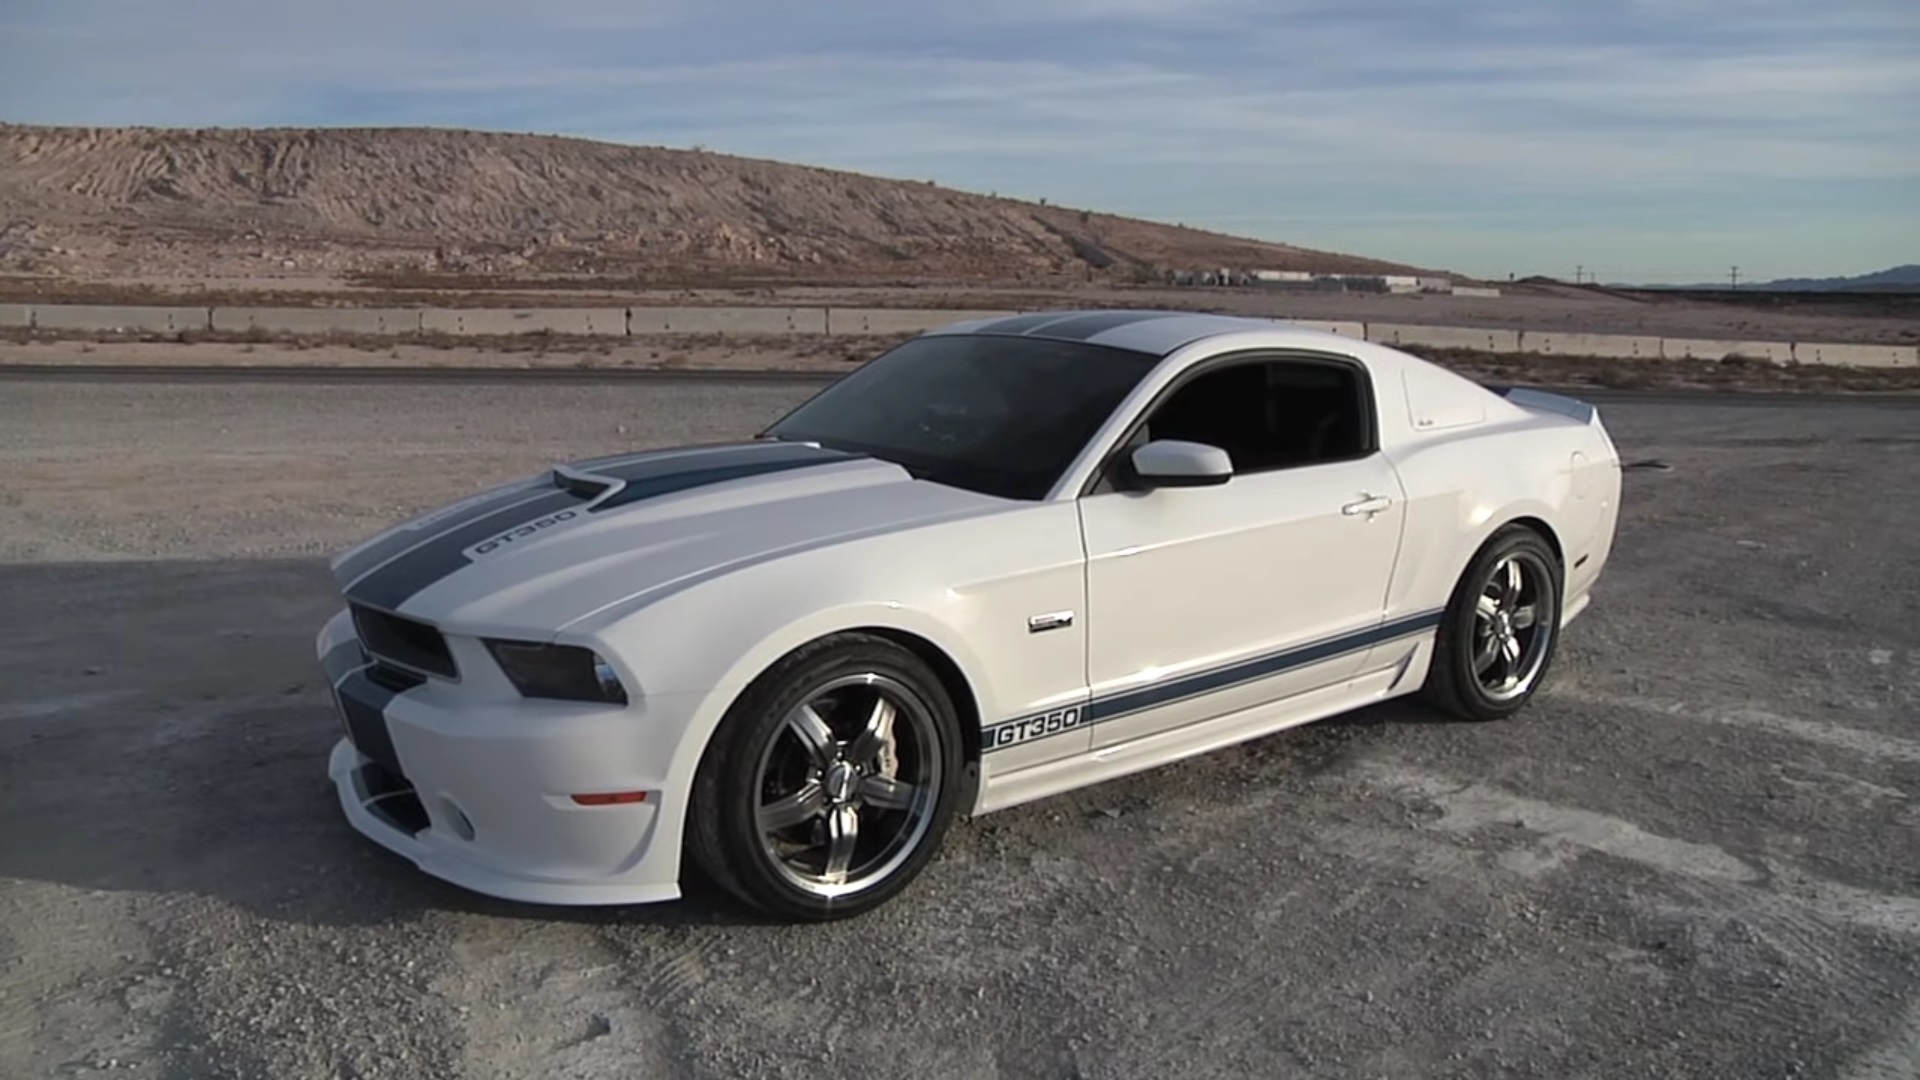 Video: 2011 Ford Mustang Shelby GT350 Massive Burnout!